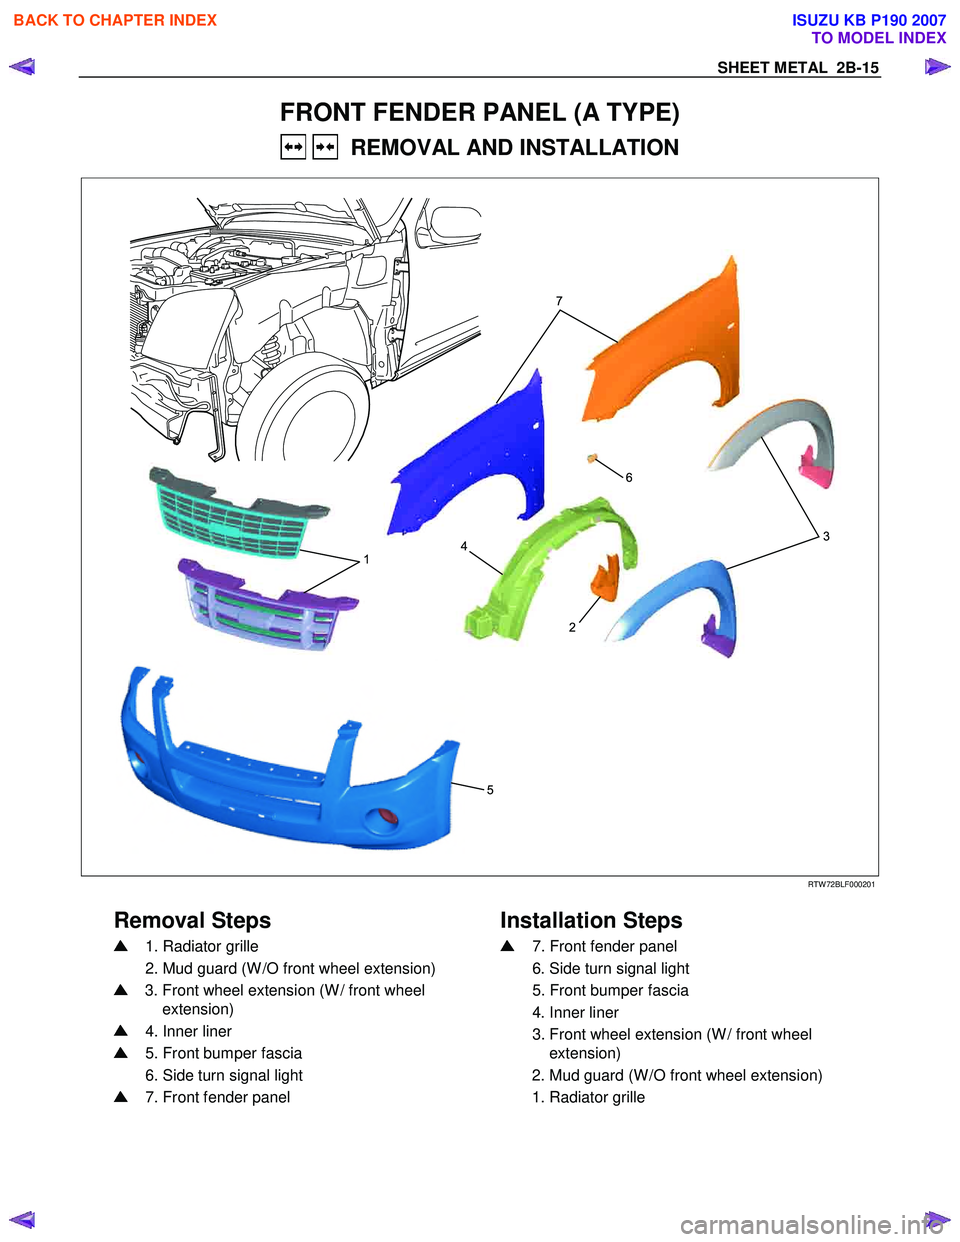 ISUZU KB P190 2007  Workshop Repair Manual SHEET METAL  2B-15 
FRONT FENDER PANEL (A TYPE)  
   REMOVAL AND INSTALLATION 
  
1
52
4
6
3
7
 
 RTW 72BLF000201 
 
Removal Steps 
 Installation Steps 
 1. Radiator grille  
  2. Mud guard (W /O fron